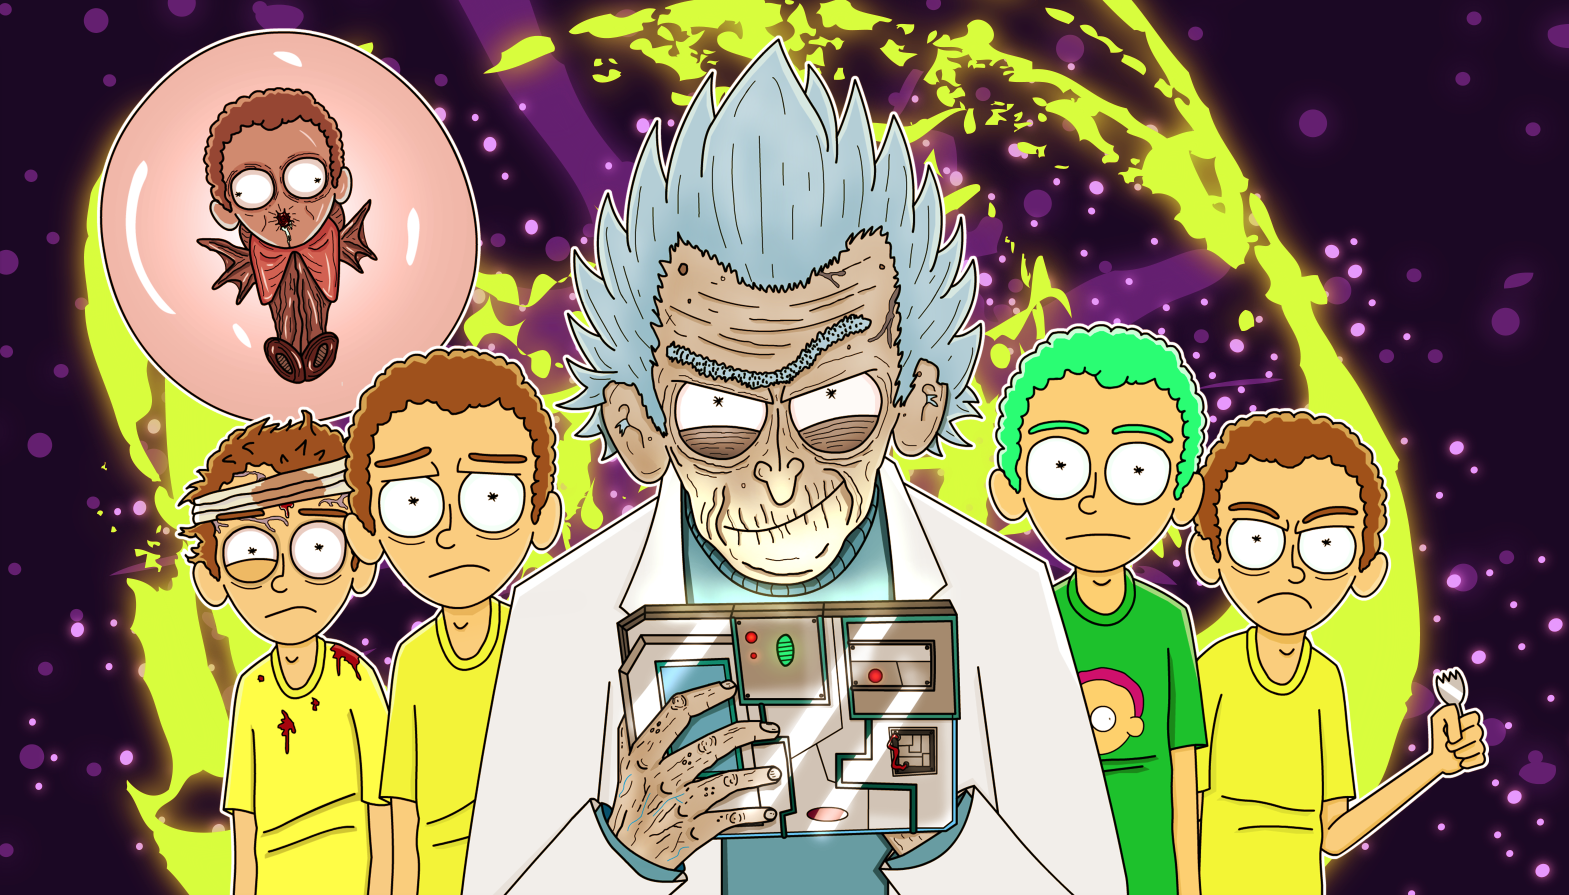 Rick and morty's на русском